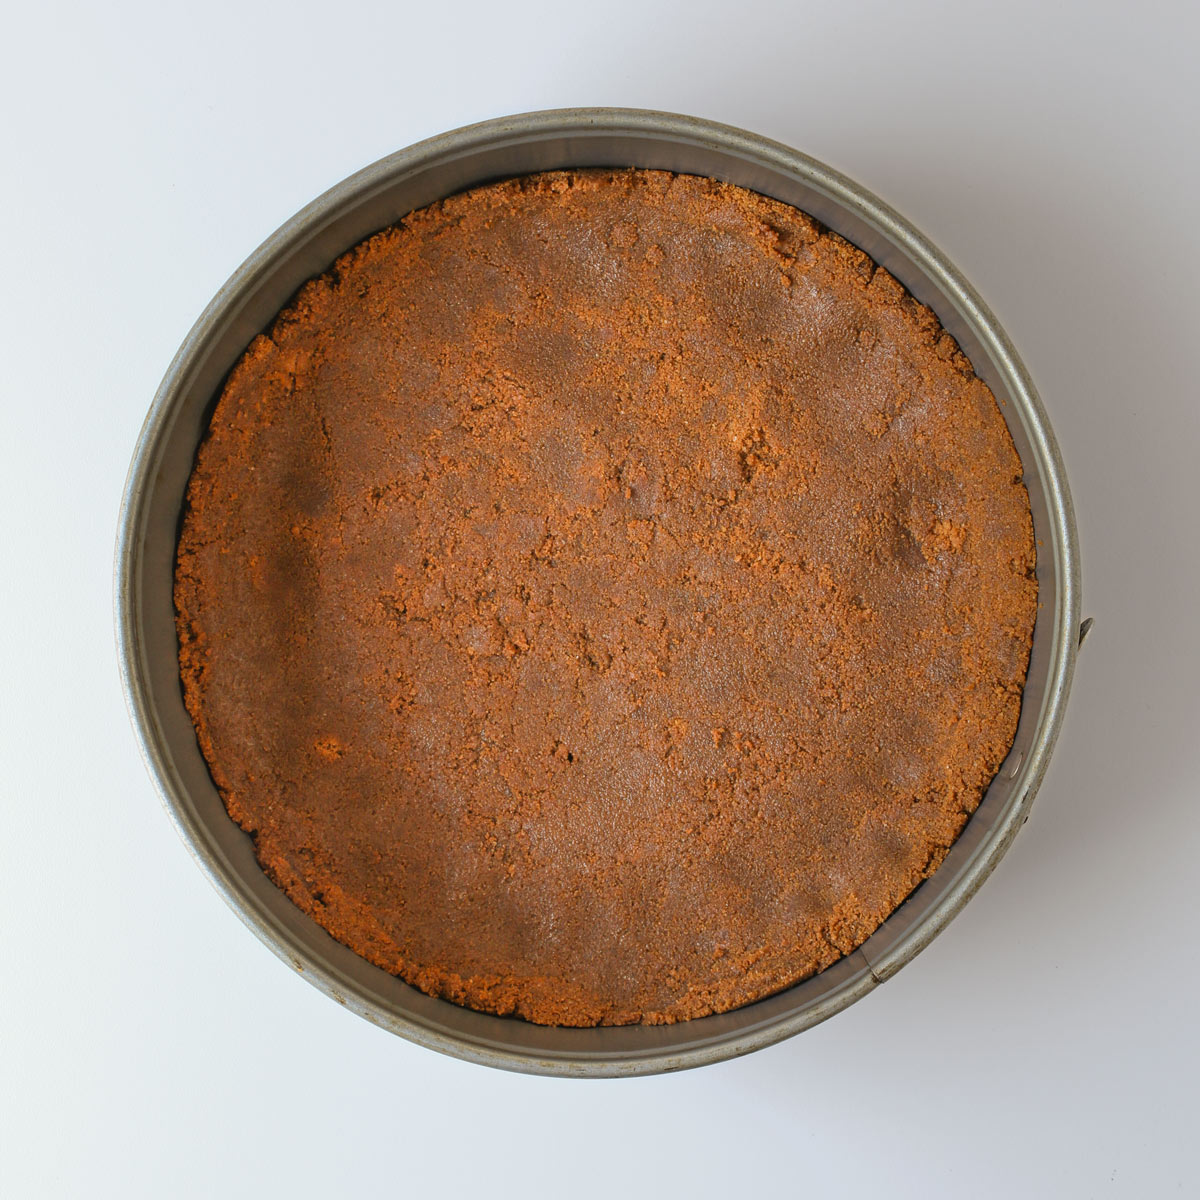 Biscoff mixture pressed into pan for baking.